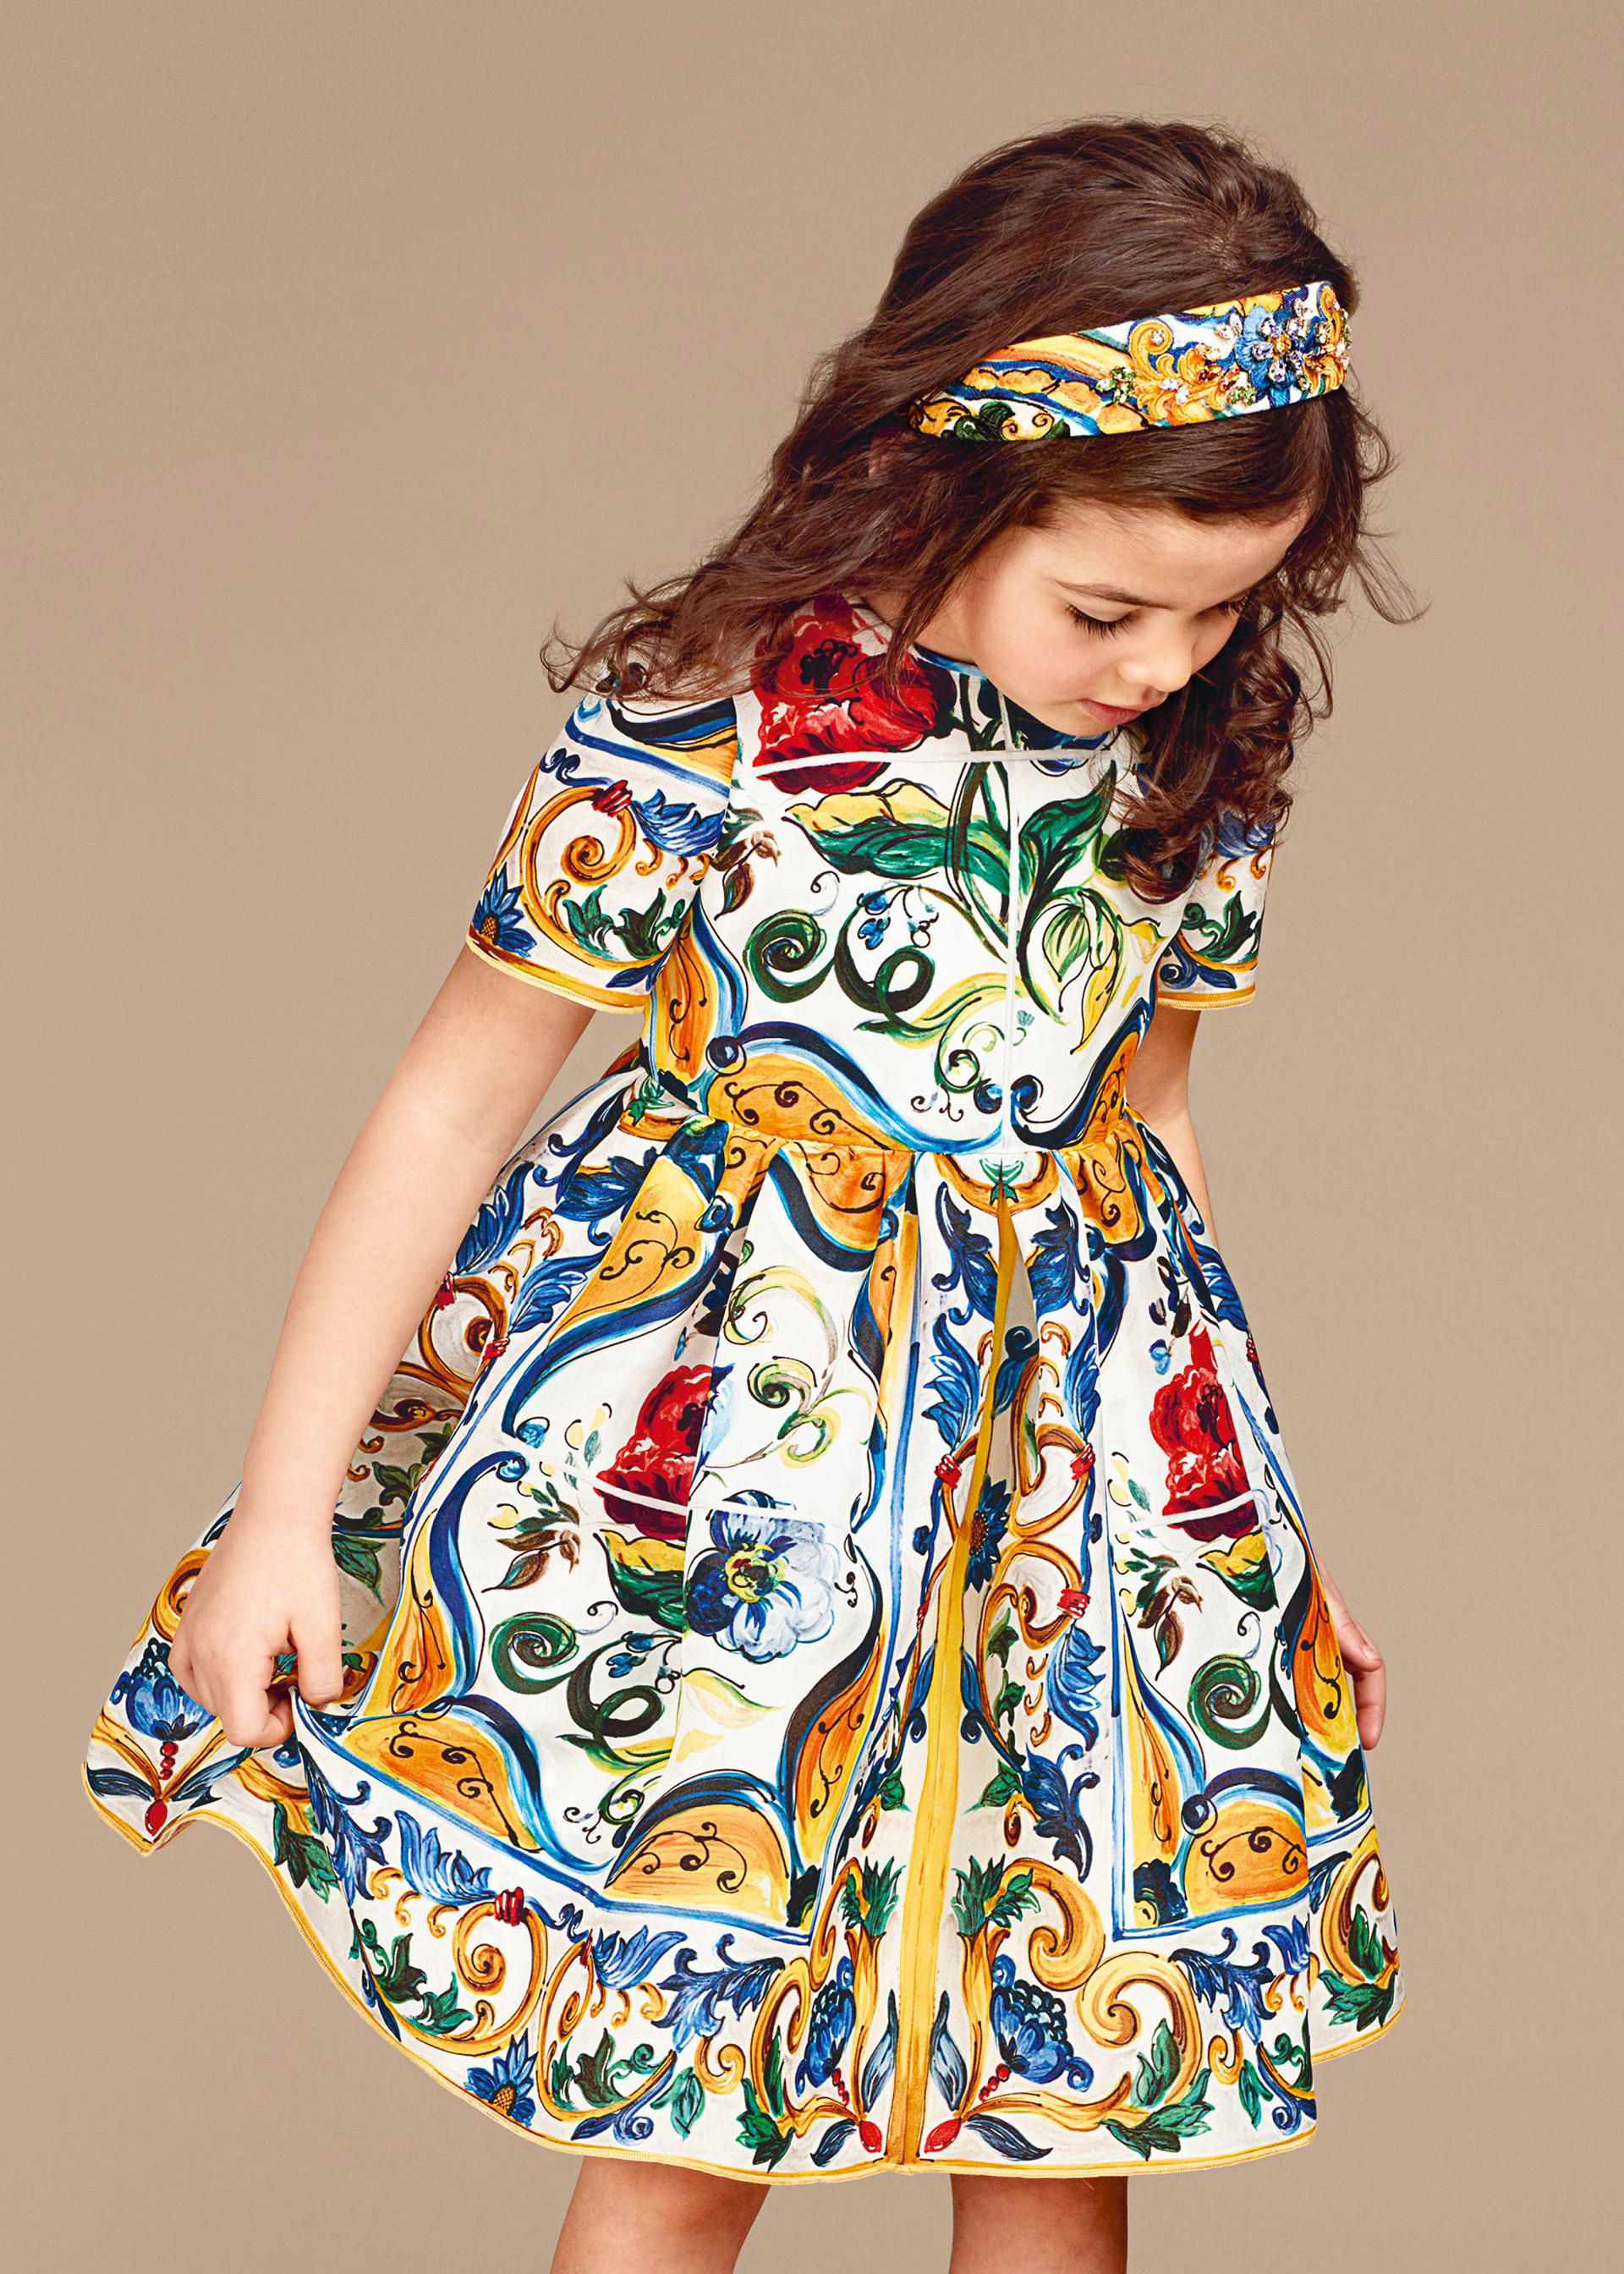 dolce-and-gabbana-winter-2017-child-collection-104